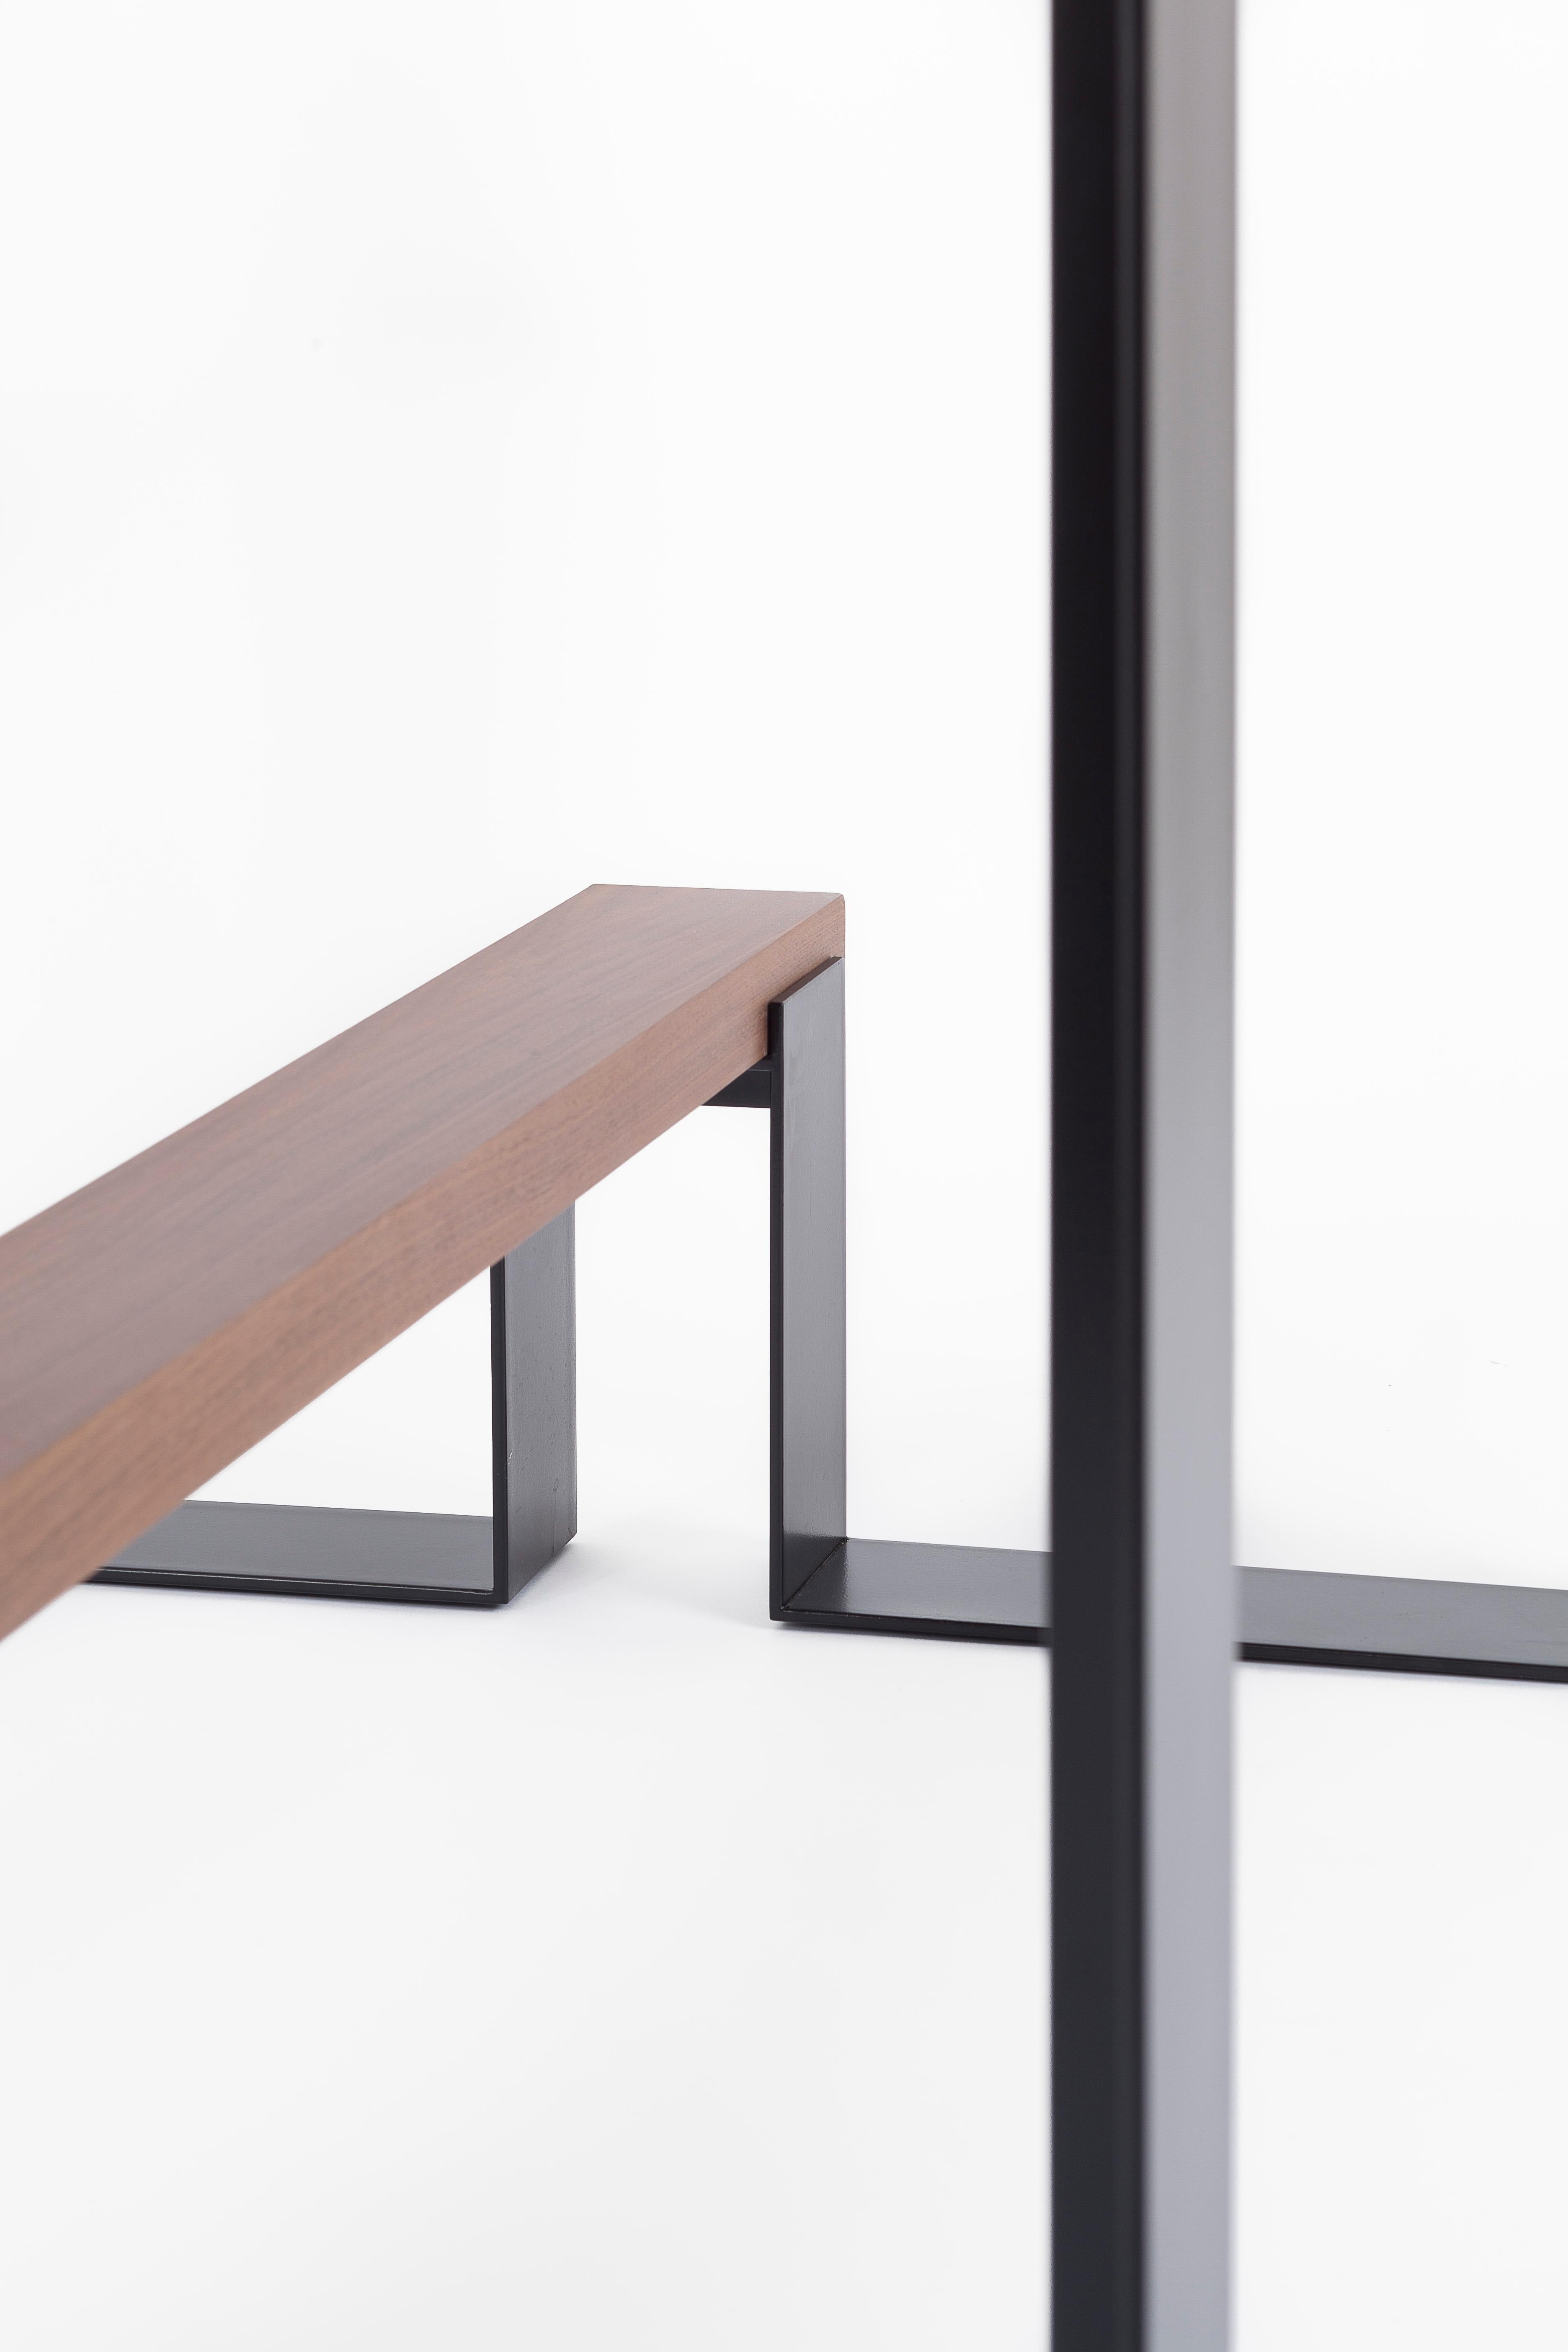 A thick (4cm) tabletop, veneered with premium wood (oak or american walnut), resting on hand-welded and polished steel brackets. An elegant footrest, forming a rich contrast with the smooth mat powder coated steel. High end materials, a slick and